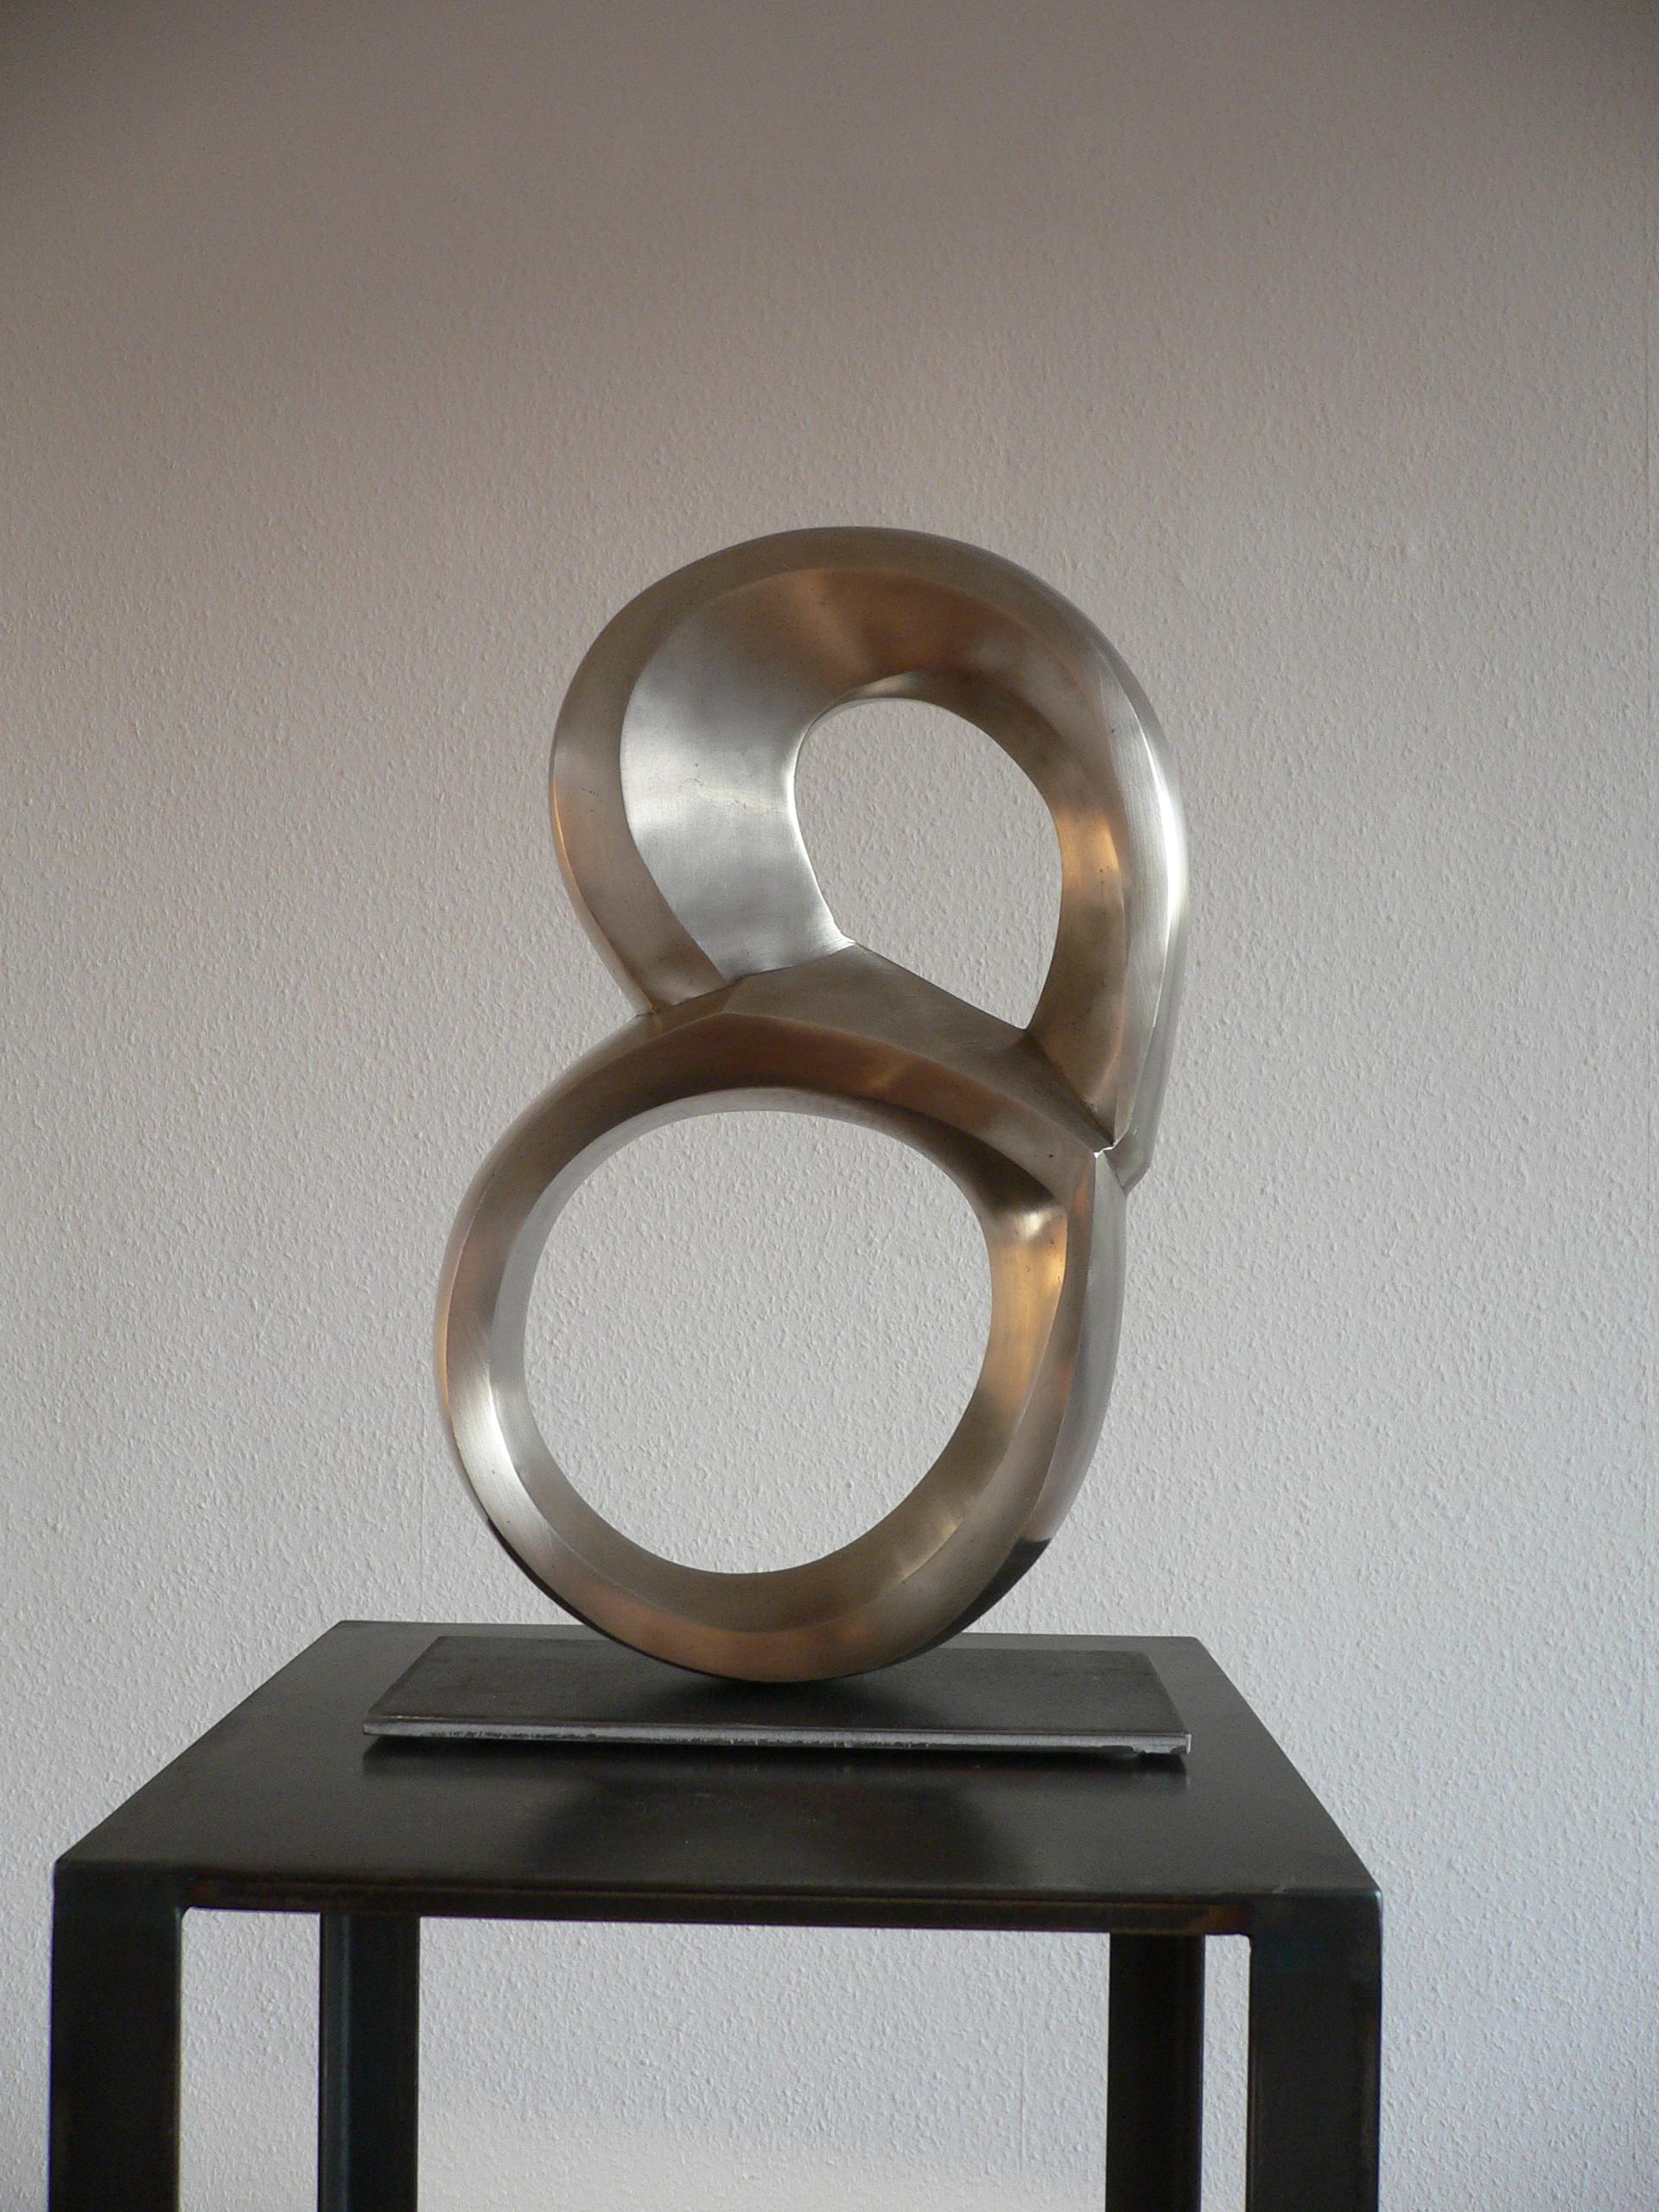 Bronze Sculpture 'Habacht!' by Carola Eggeling 
Abstract sculpture with beautiful curved lines.

German bronze sculpture
Numbered and signed artwork
Limited edition of 9
Measures: 25 x 15 x 13 cm.
Lead time: 8 weeks  

Eggeling's are pure forms, the